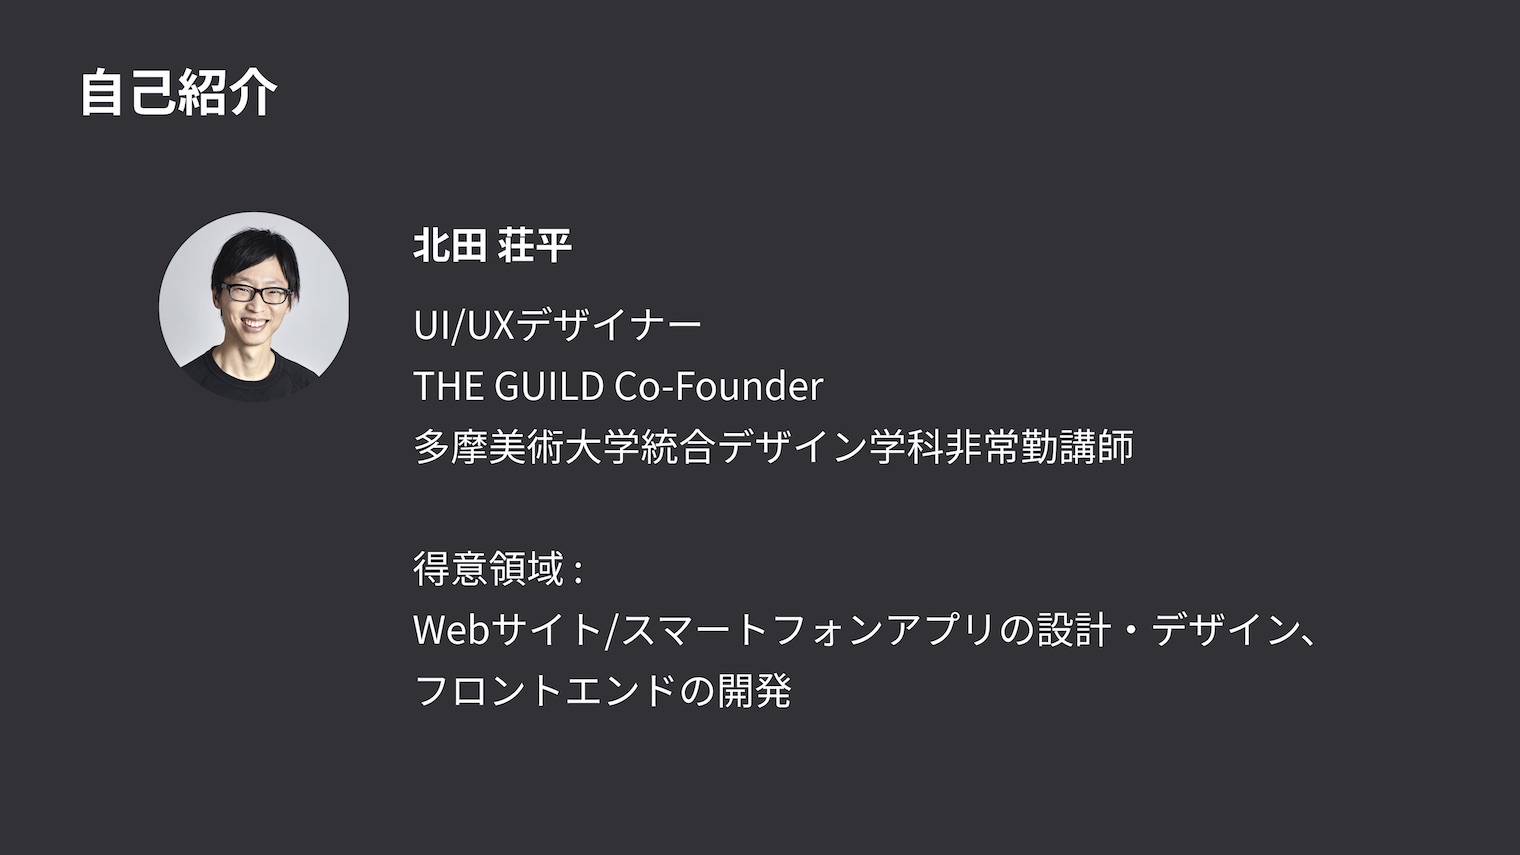 THE GUILD Co-Founder北田さん自己紹介スライド